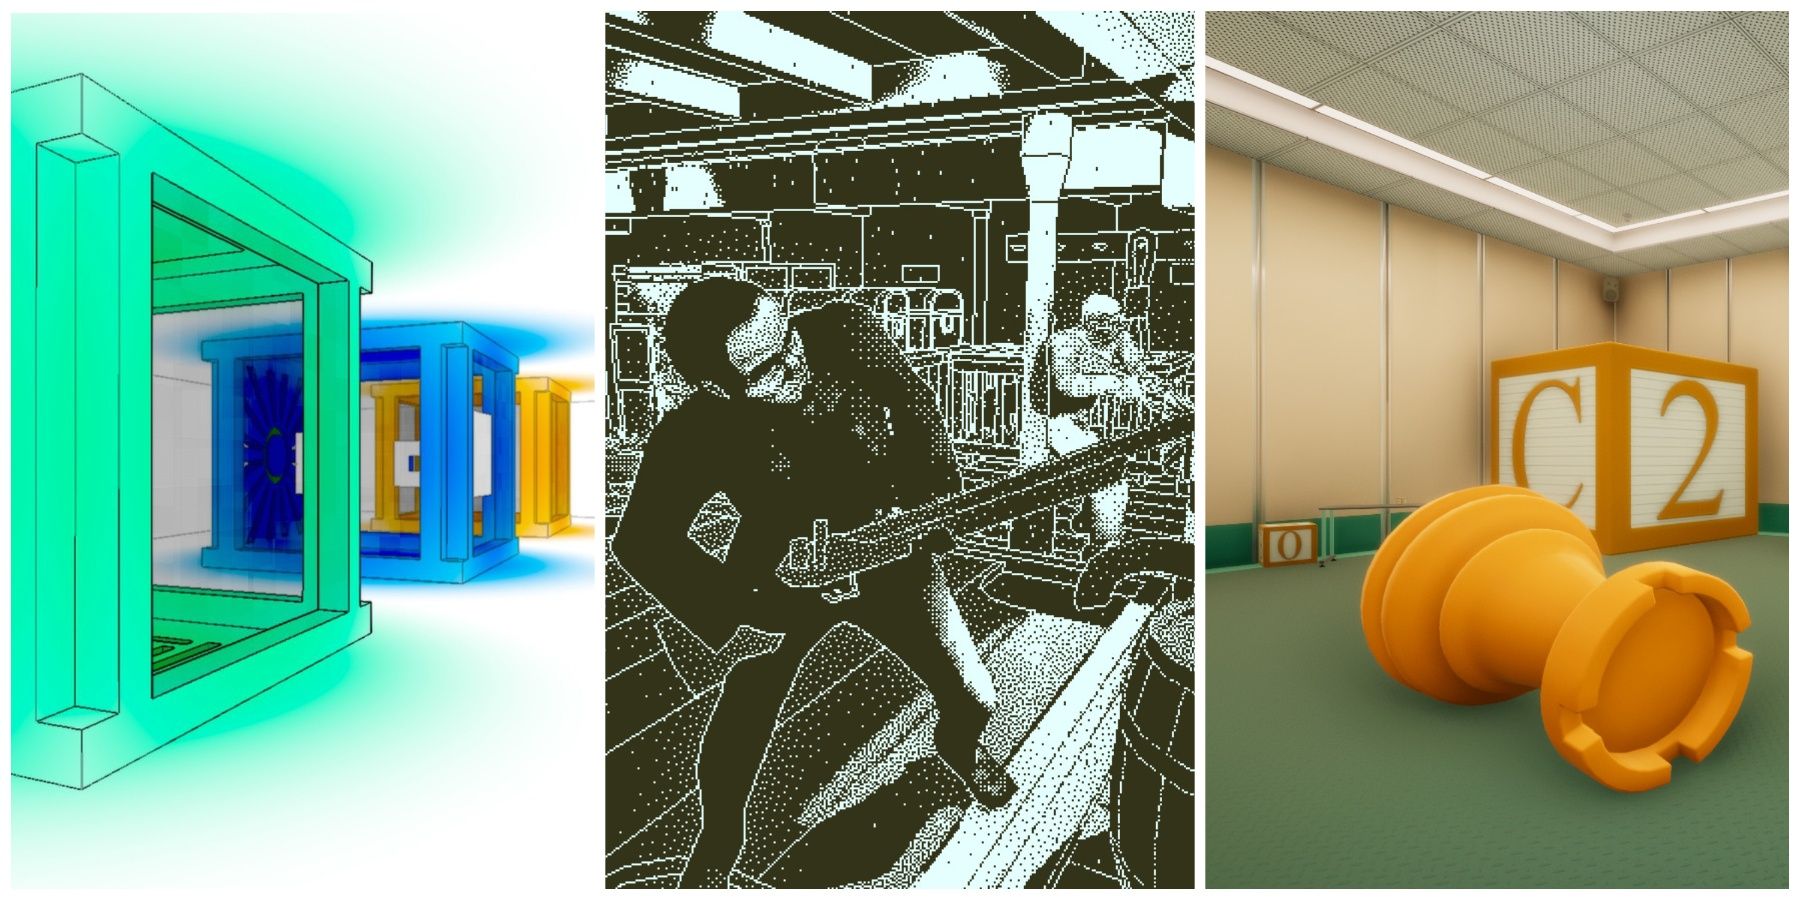 Featured images of First-Person Puzzle games Antichamber, Return of the Obra Dinn, and Superliminal